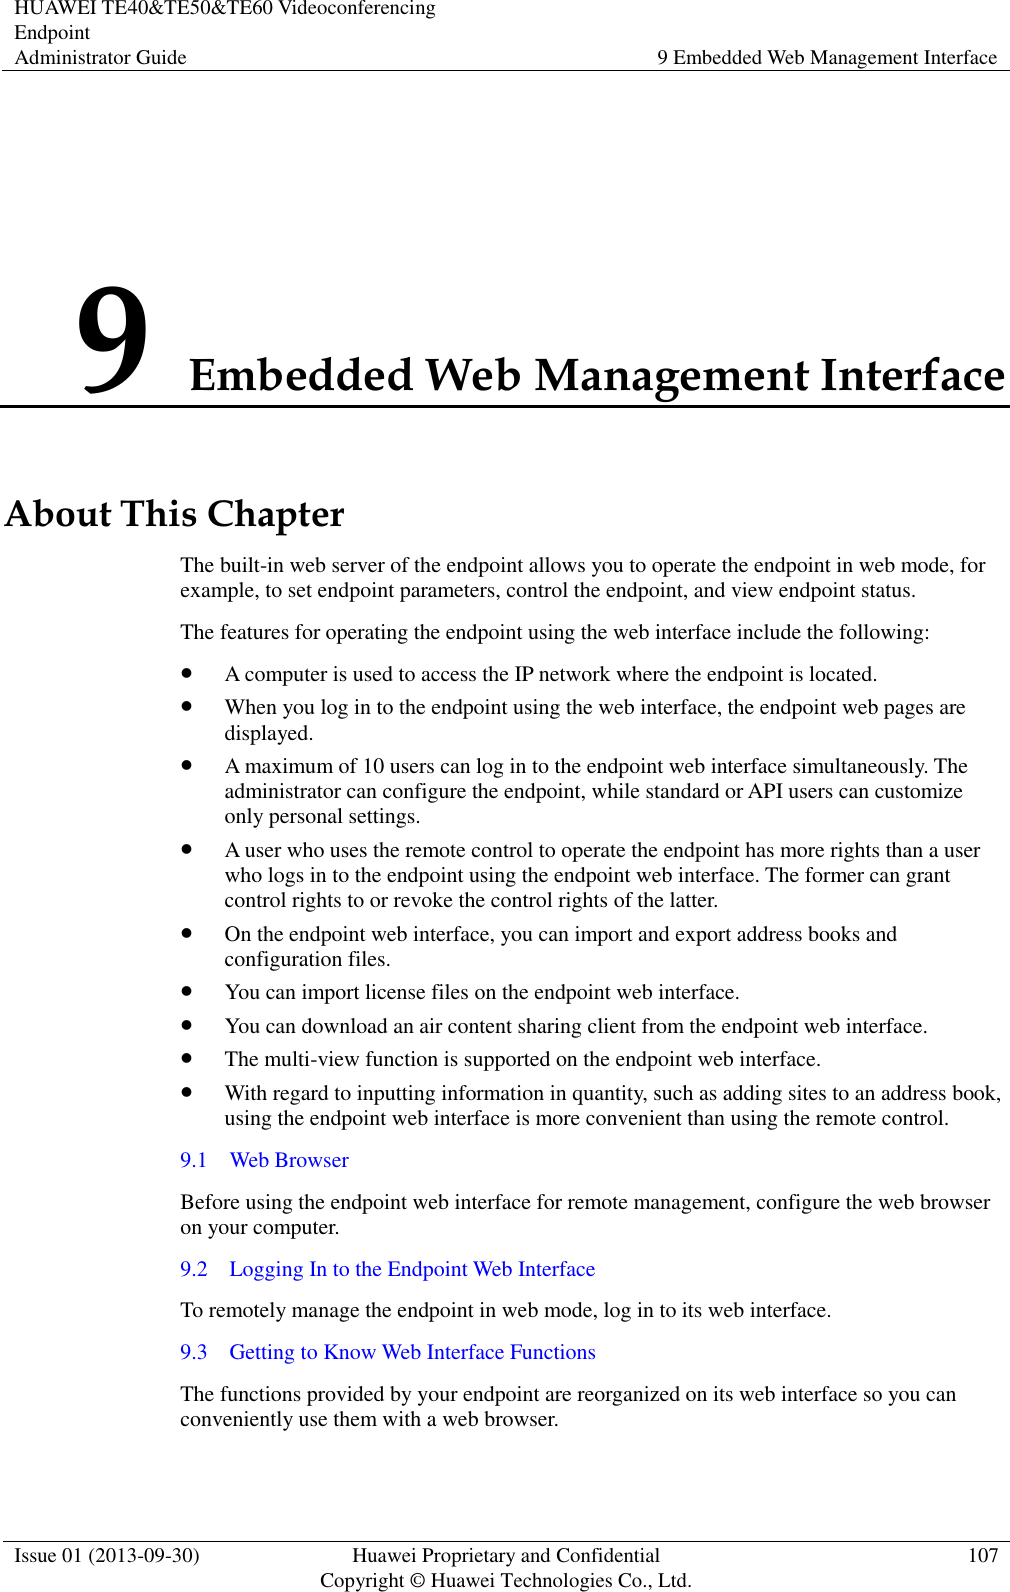 HUAWEI TE40&amp;TE50&amp;TE60 Videoconferencing Endpoint Administrator Guide 9 Embedded Web Management Interface  Issue 01 (2013-09-30) Huawei Proprietary and Confidential                                     Copyright © Huawei Technologies Co., Ltd. 107  9 Embedded Web Management Interface About This Chapter The built-in web server of the endpoint allows you to operate the endpoint in web mode, for example, to set endpoint parameters, control the endpoint, and view endpoint status. The features for operating the endpoint using the web interface include the following:  A computer is used to access the IP network where the endpoint is located.  When you log in to the endpoint using the web interface, the endpoint web pages are displayed.  A maximum of 10 users can log in to the endpoint web interface simultaneously. The administrator can configure the endpoint, while standard or API users can customize only personal settings.  A user who uses the remote control to operate the endpoint has more rights than a user who logs in to the endpoint using the endpoint web interface. The former can grant control rights to or revoke the control rights of the latter.  On the endpoint web interface, you can import and export address books and configuration files.  You can import license files on the endpoint web interface.  You can download an air content sharing client from the endpoint web interface.    The multi-view function is supported on the endpoint web interface.  With regard to inputting information in quantity, such as adding sites to an address book, using the endpoint web interface is more convenient than using the remote control. 9.1    Web Browser Before using the endpoint web interface for remote management, configure the web browser on your computer. 9.2    Logging In to the Endpoint Web Interface To remotely manage the endpoint in web mode, log in to its web interface. 9.3    Getting to Know Web Interface Functions The functions provided by your endpoint are reorganized on its web interface so you can conveniently use them with a web browser. 